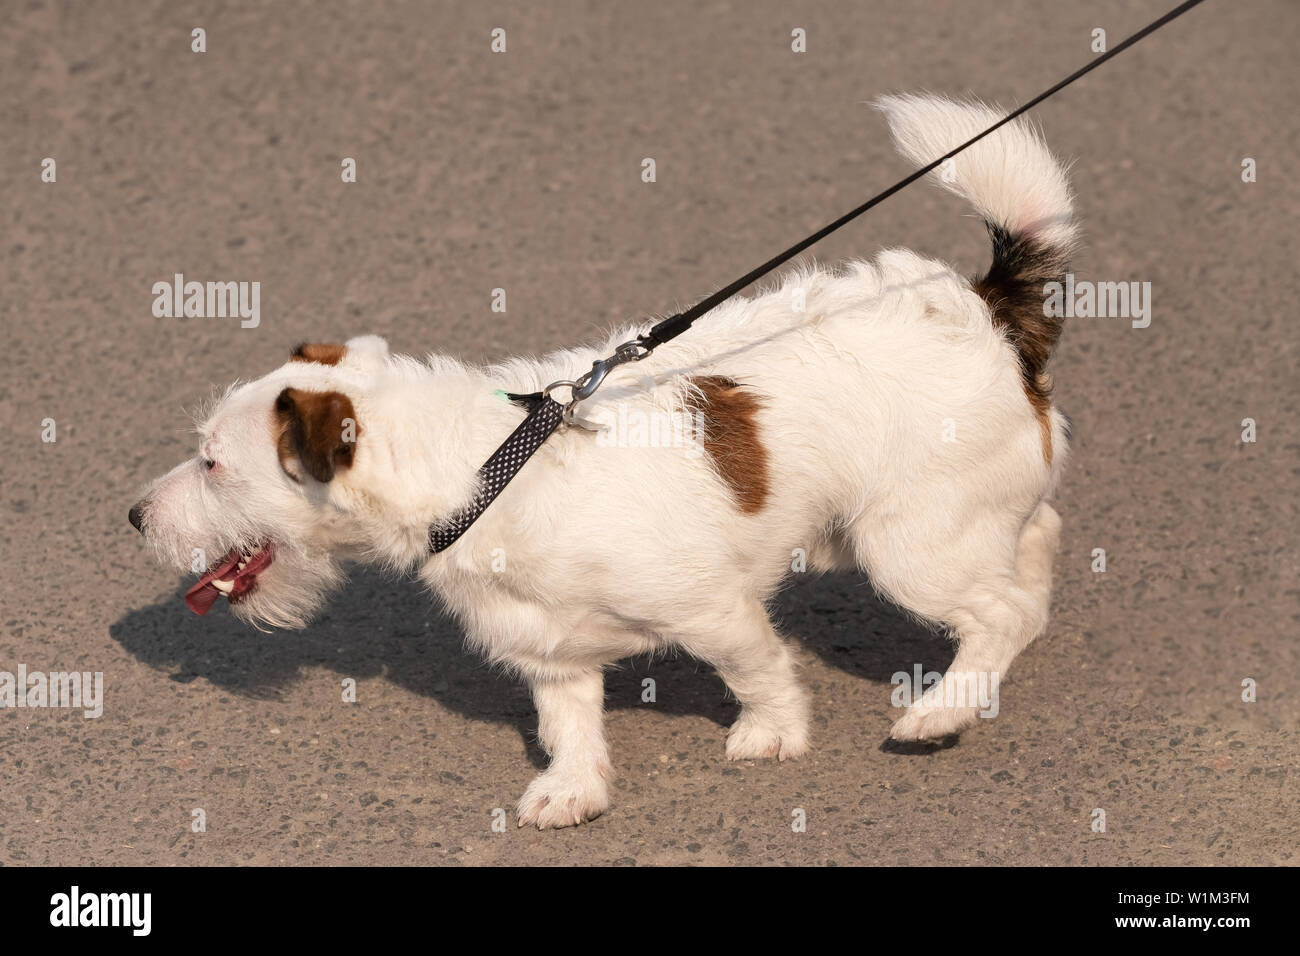 description: Obedient dog and long-line training leash on green grass background Stock Photo